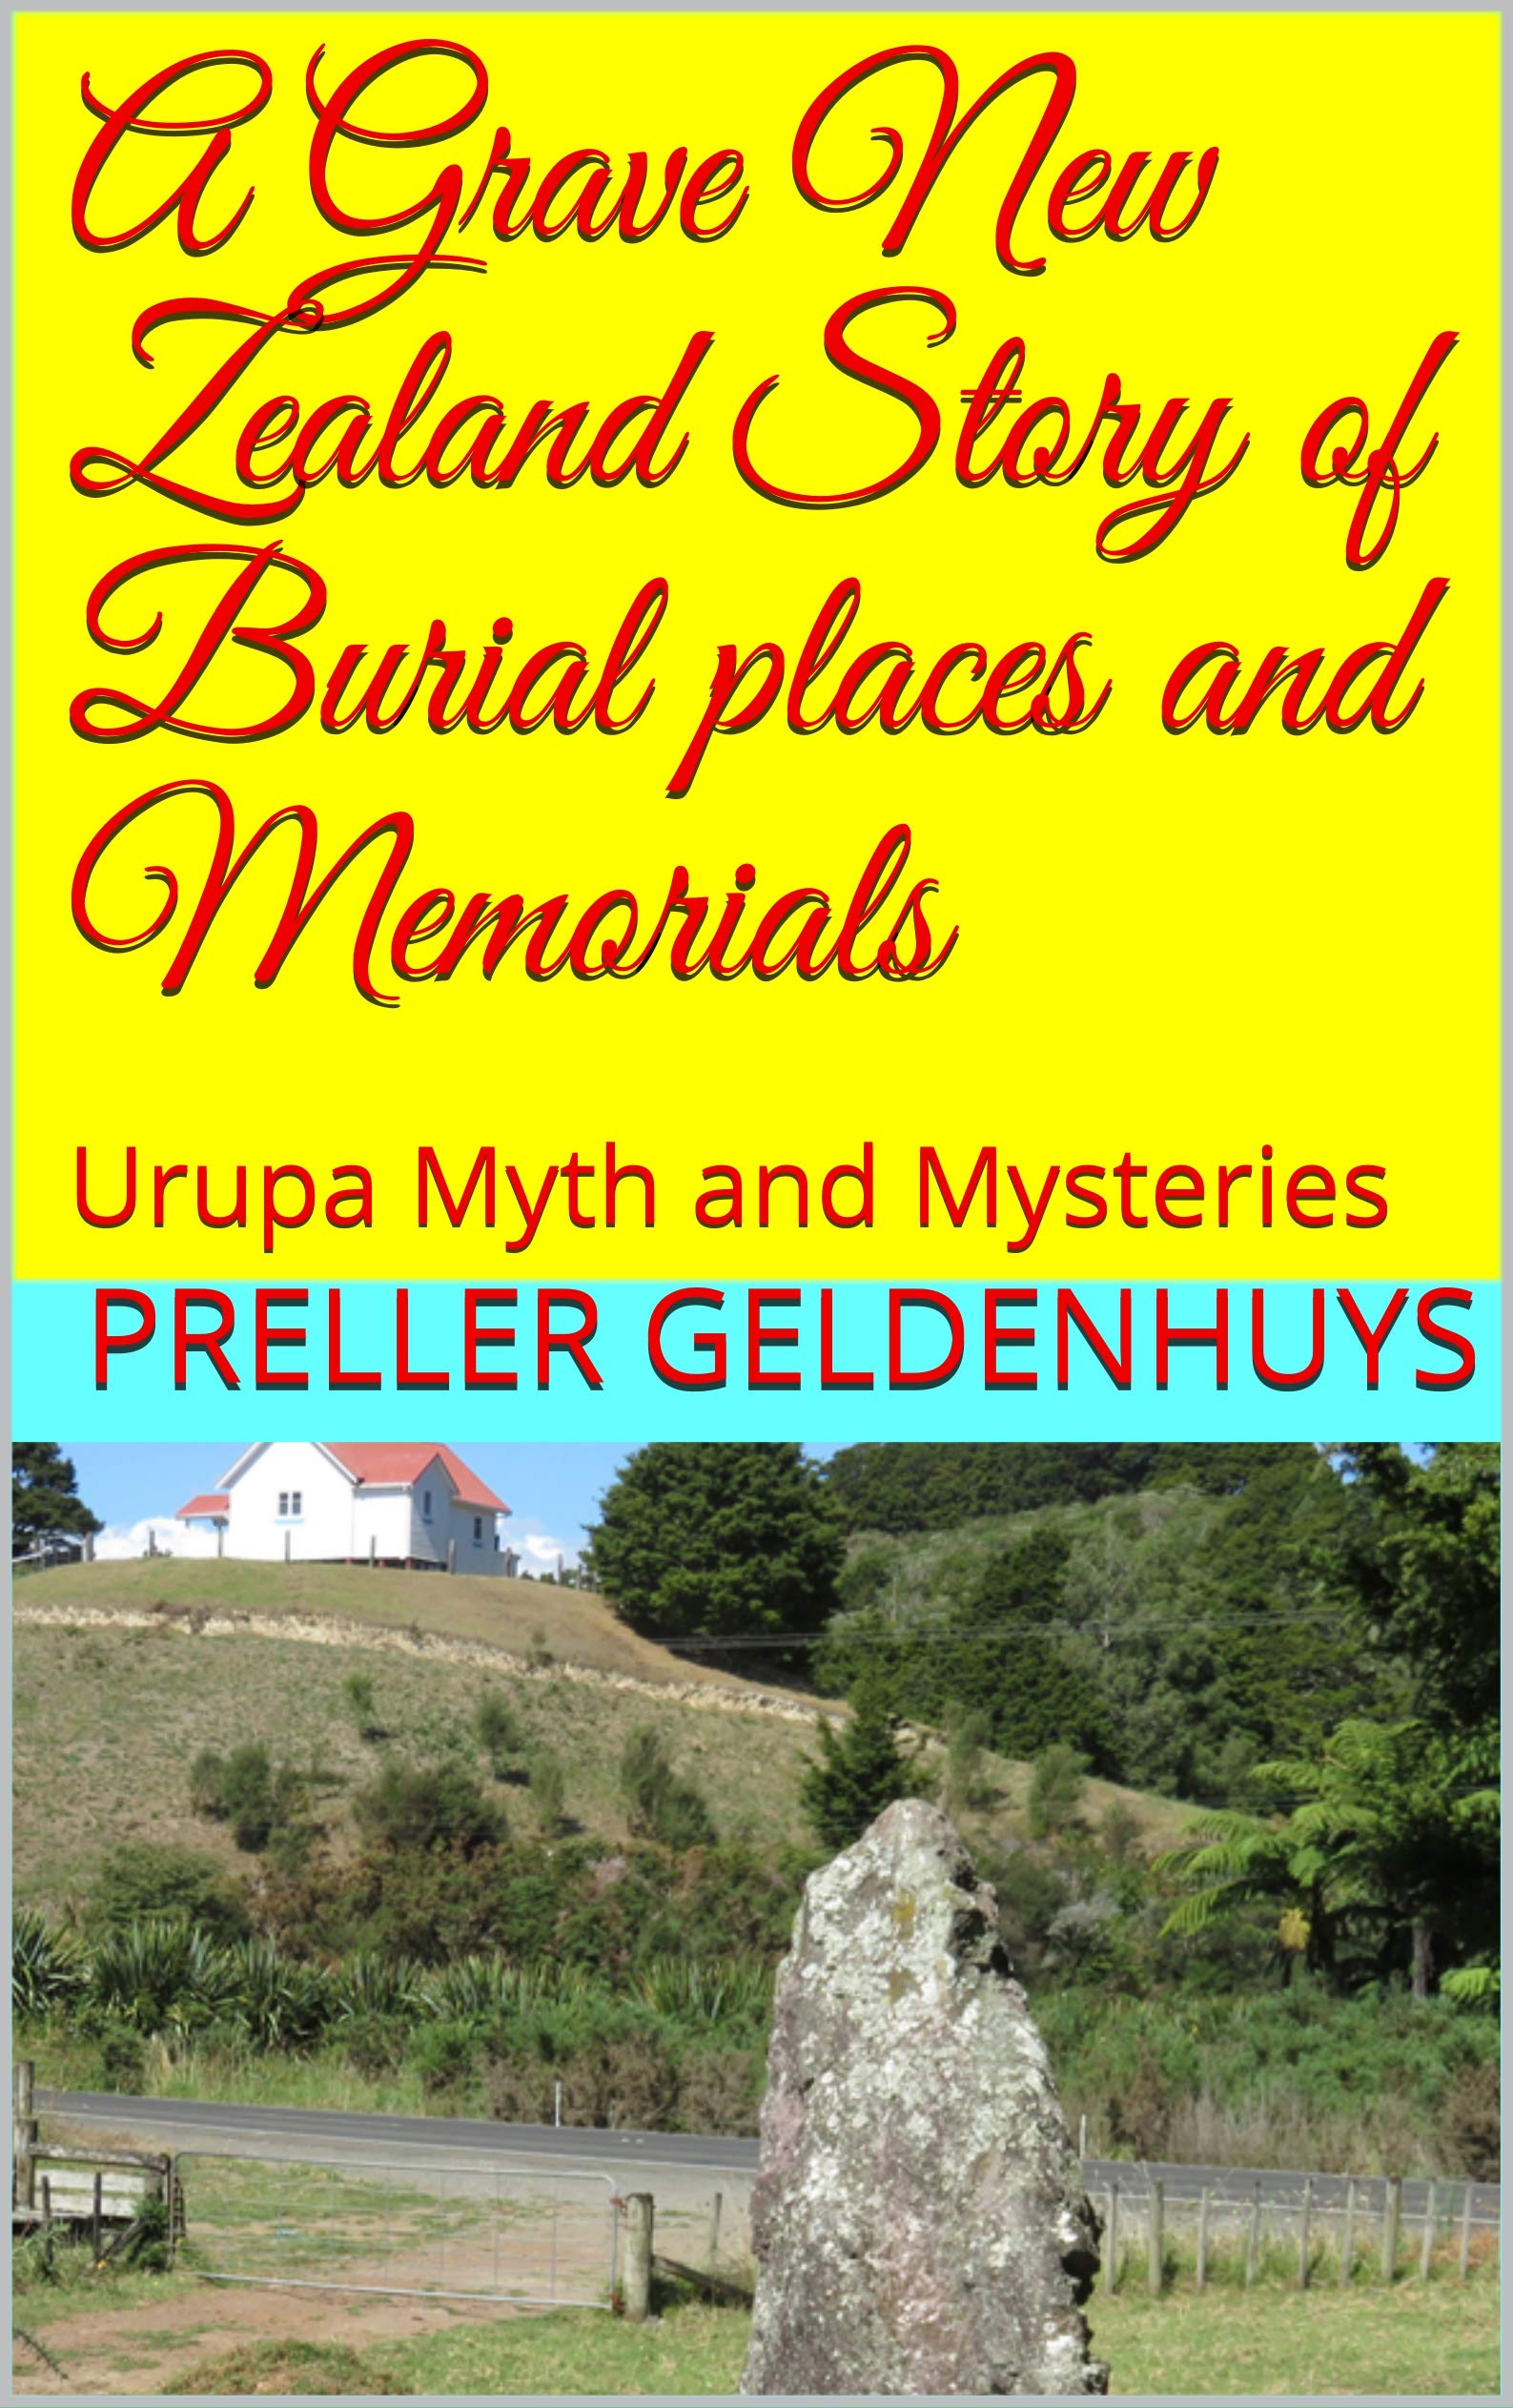 A Grave New Zealand Story of Burial places and Memorials: Urupa Myth and Mysteries